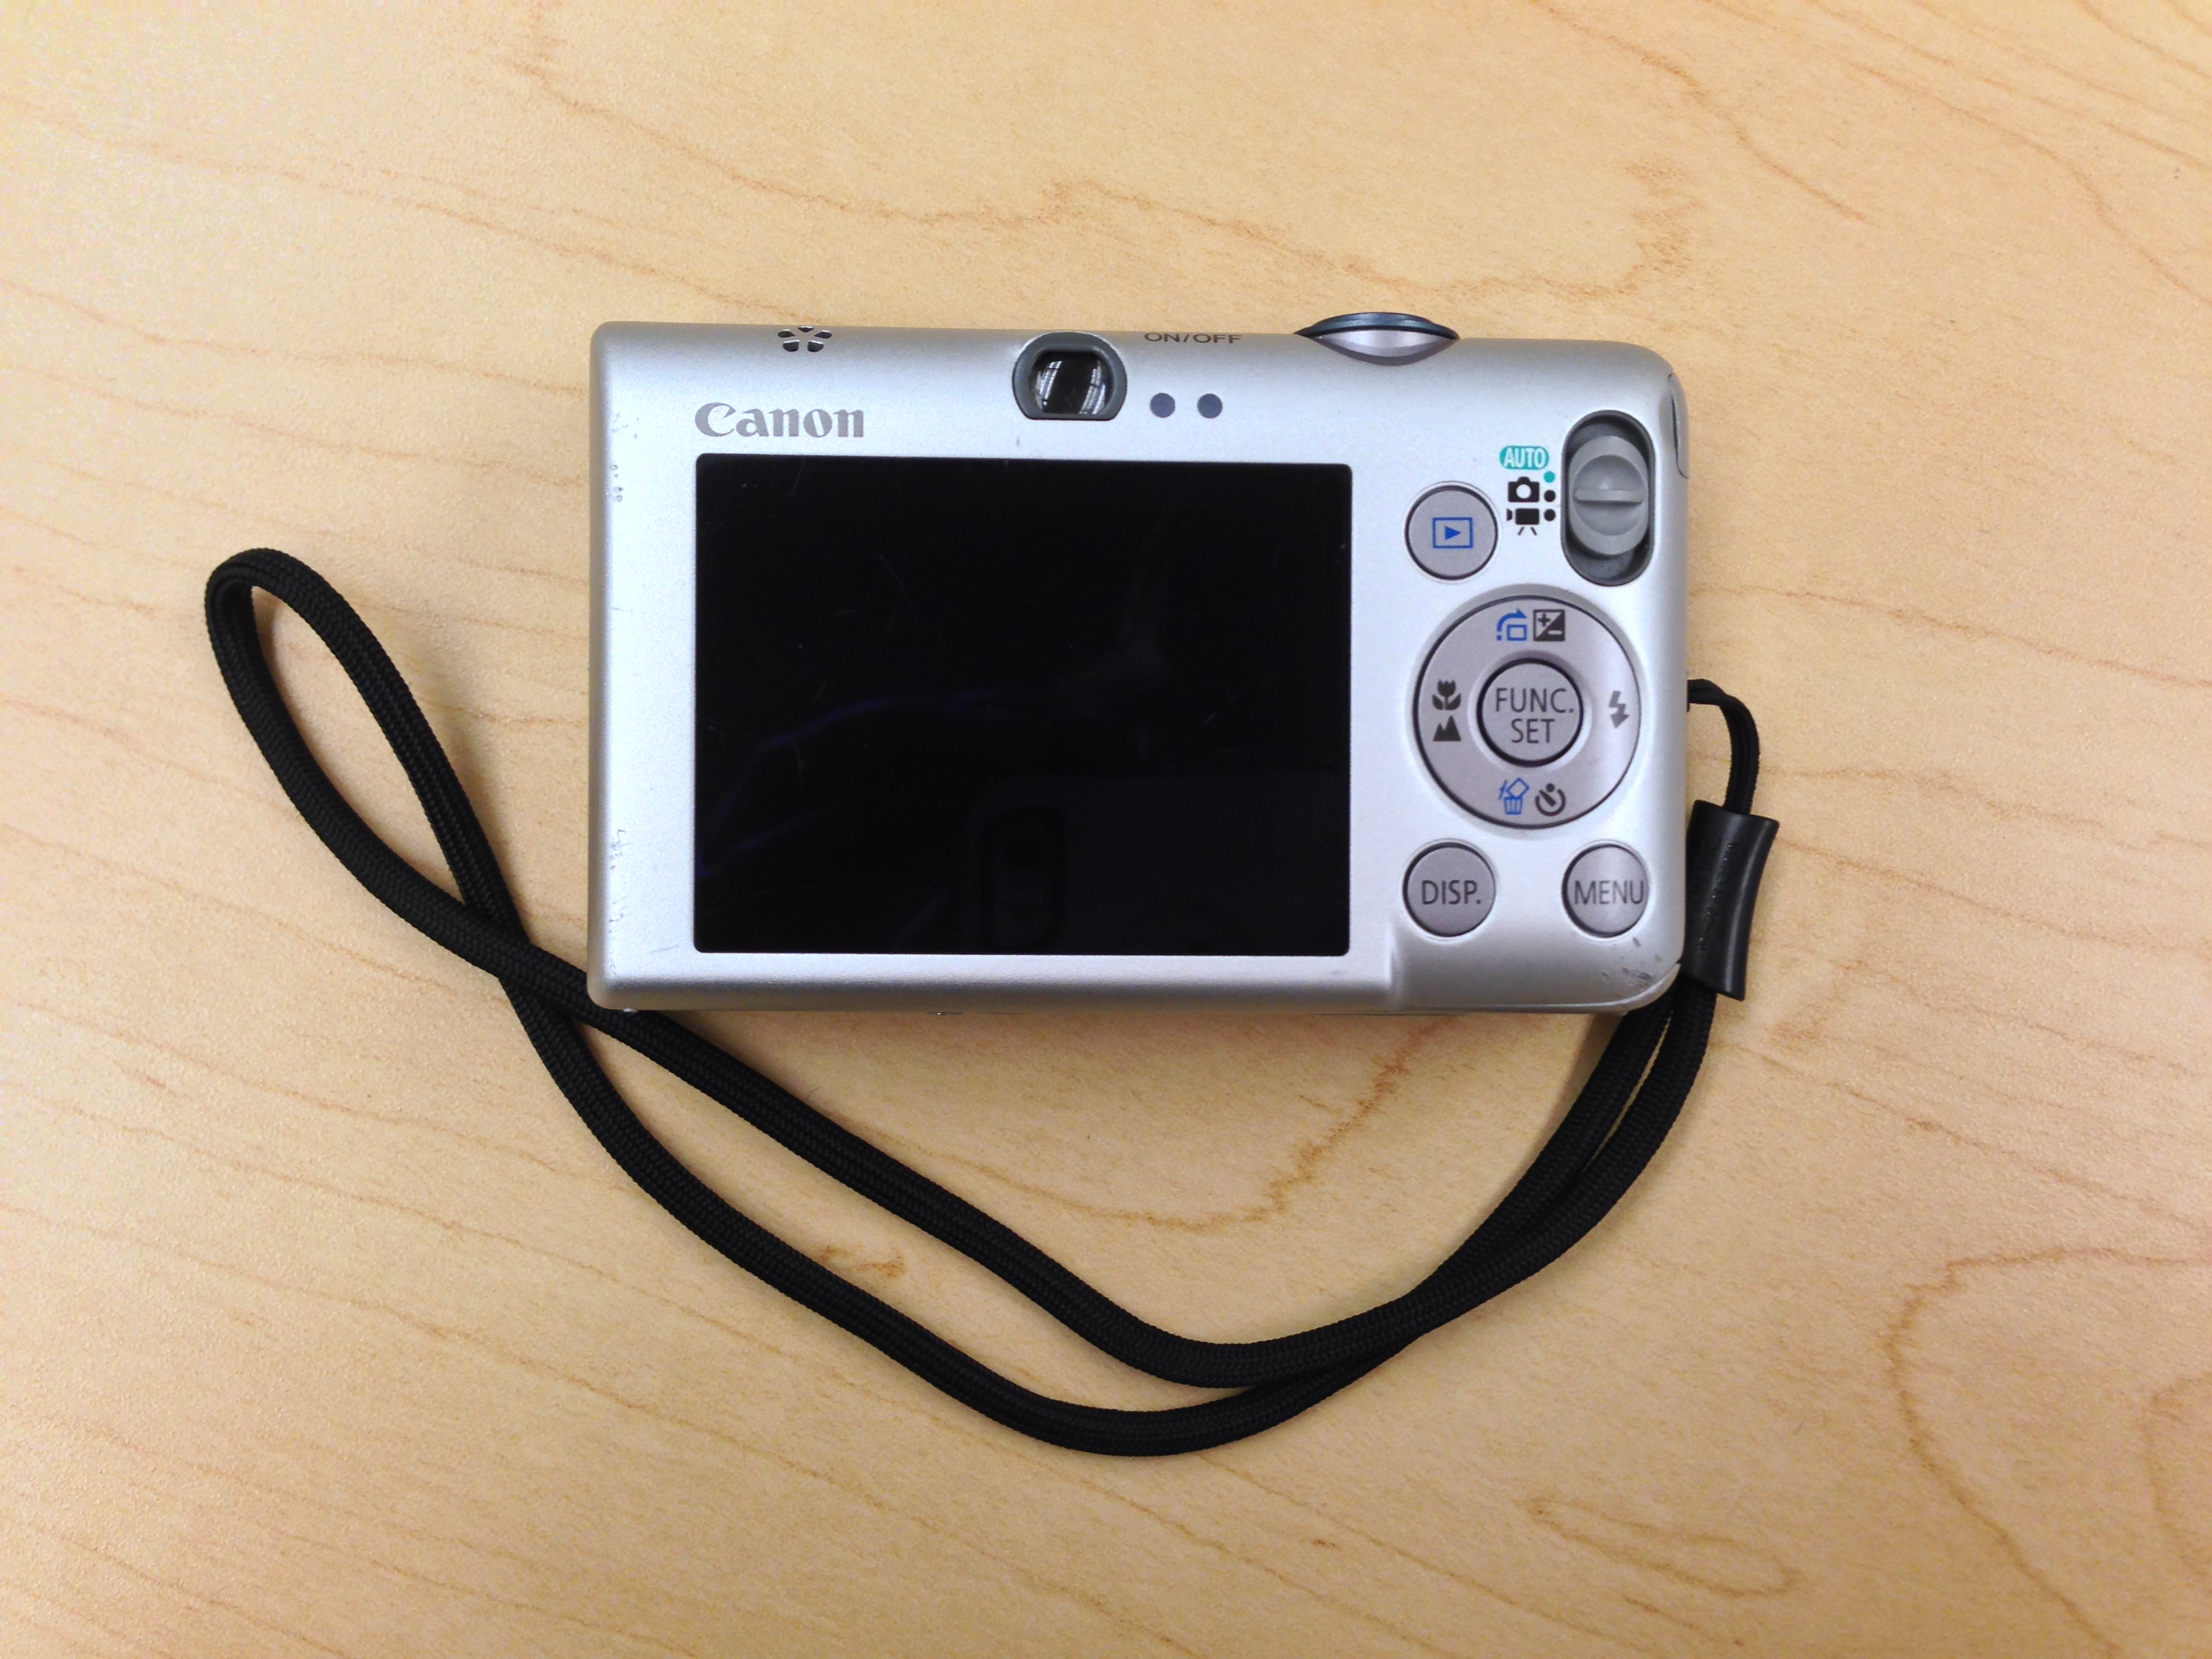 Screen View of the Canon Powershot Camera